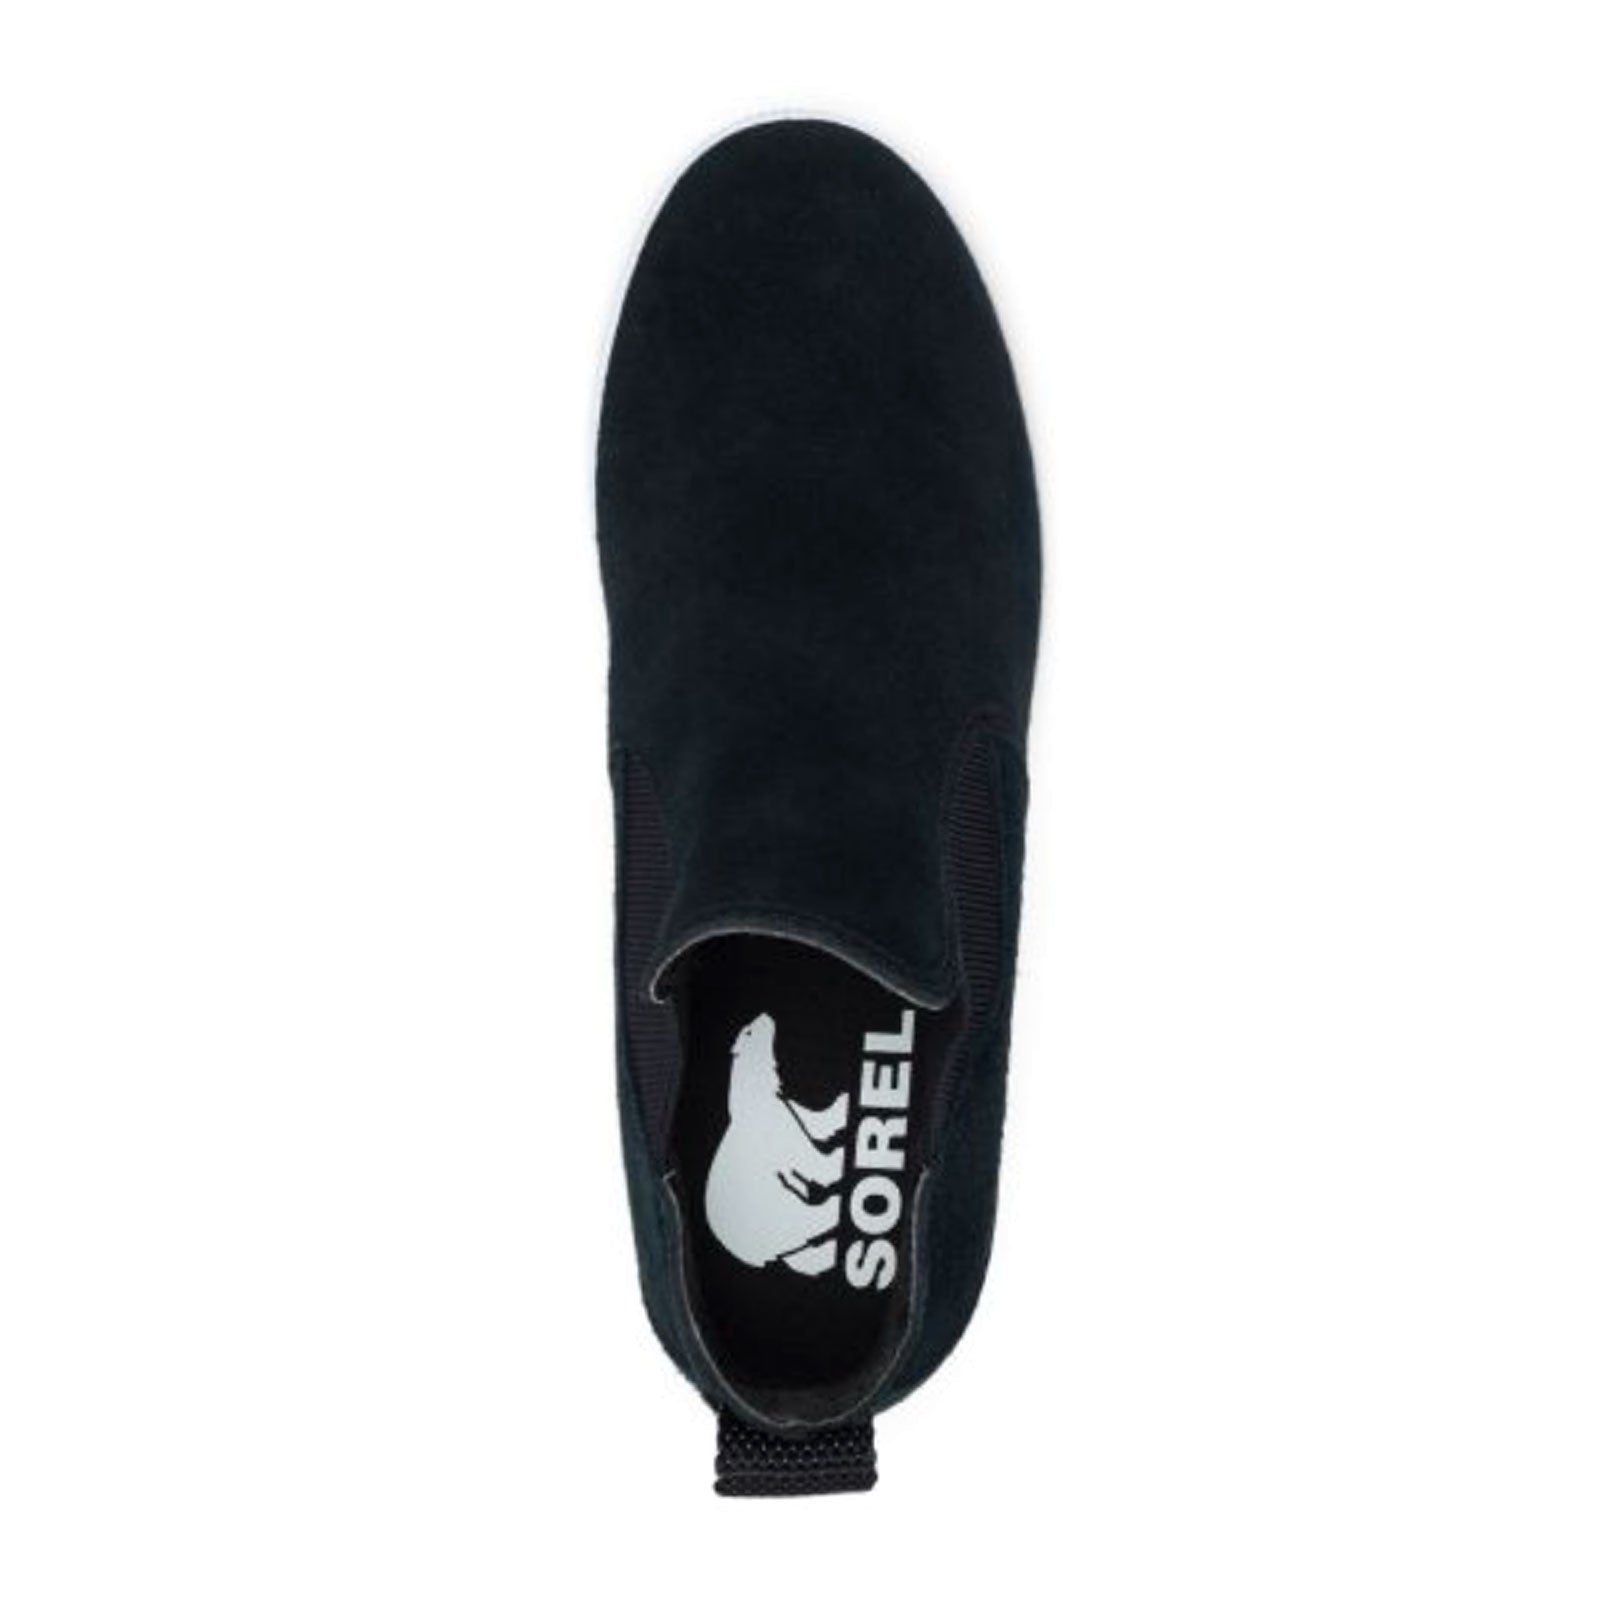 Sorel Out 'N About Slip-On Wedge (Women) - Black/White Boots - Fashion - Wedge - The Heel Shoe Fitters